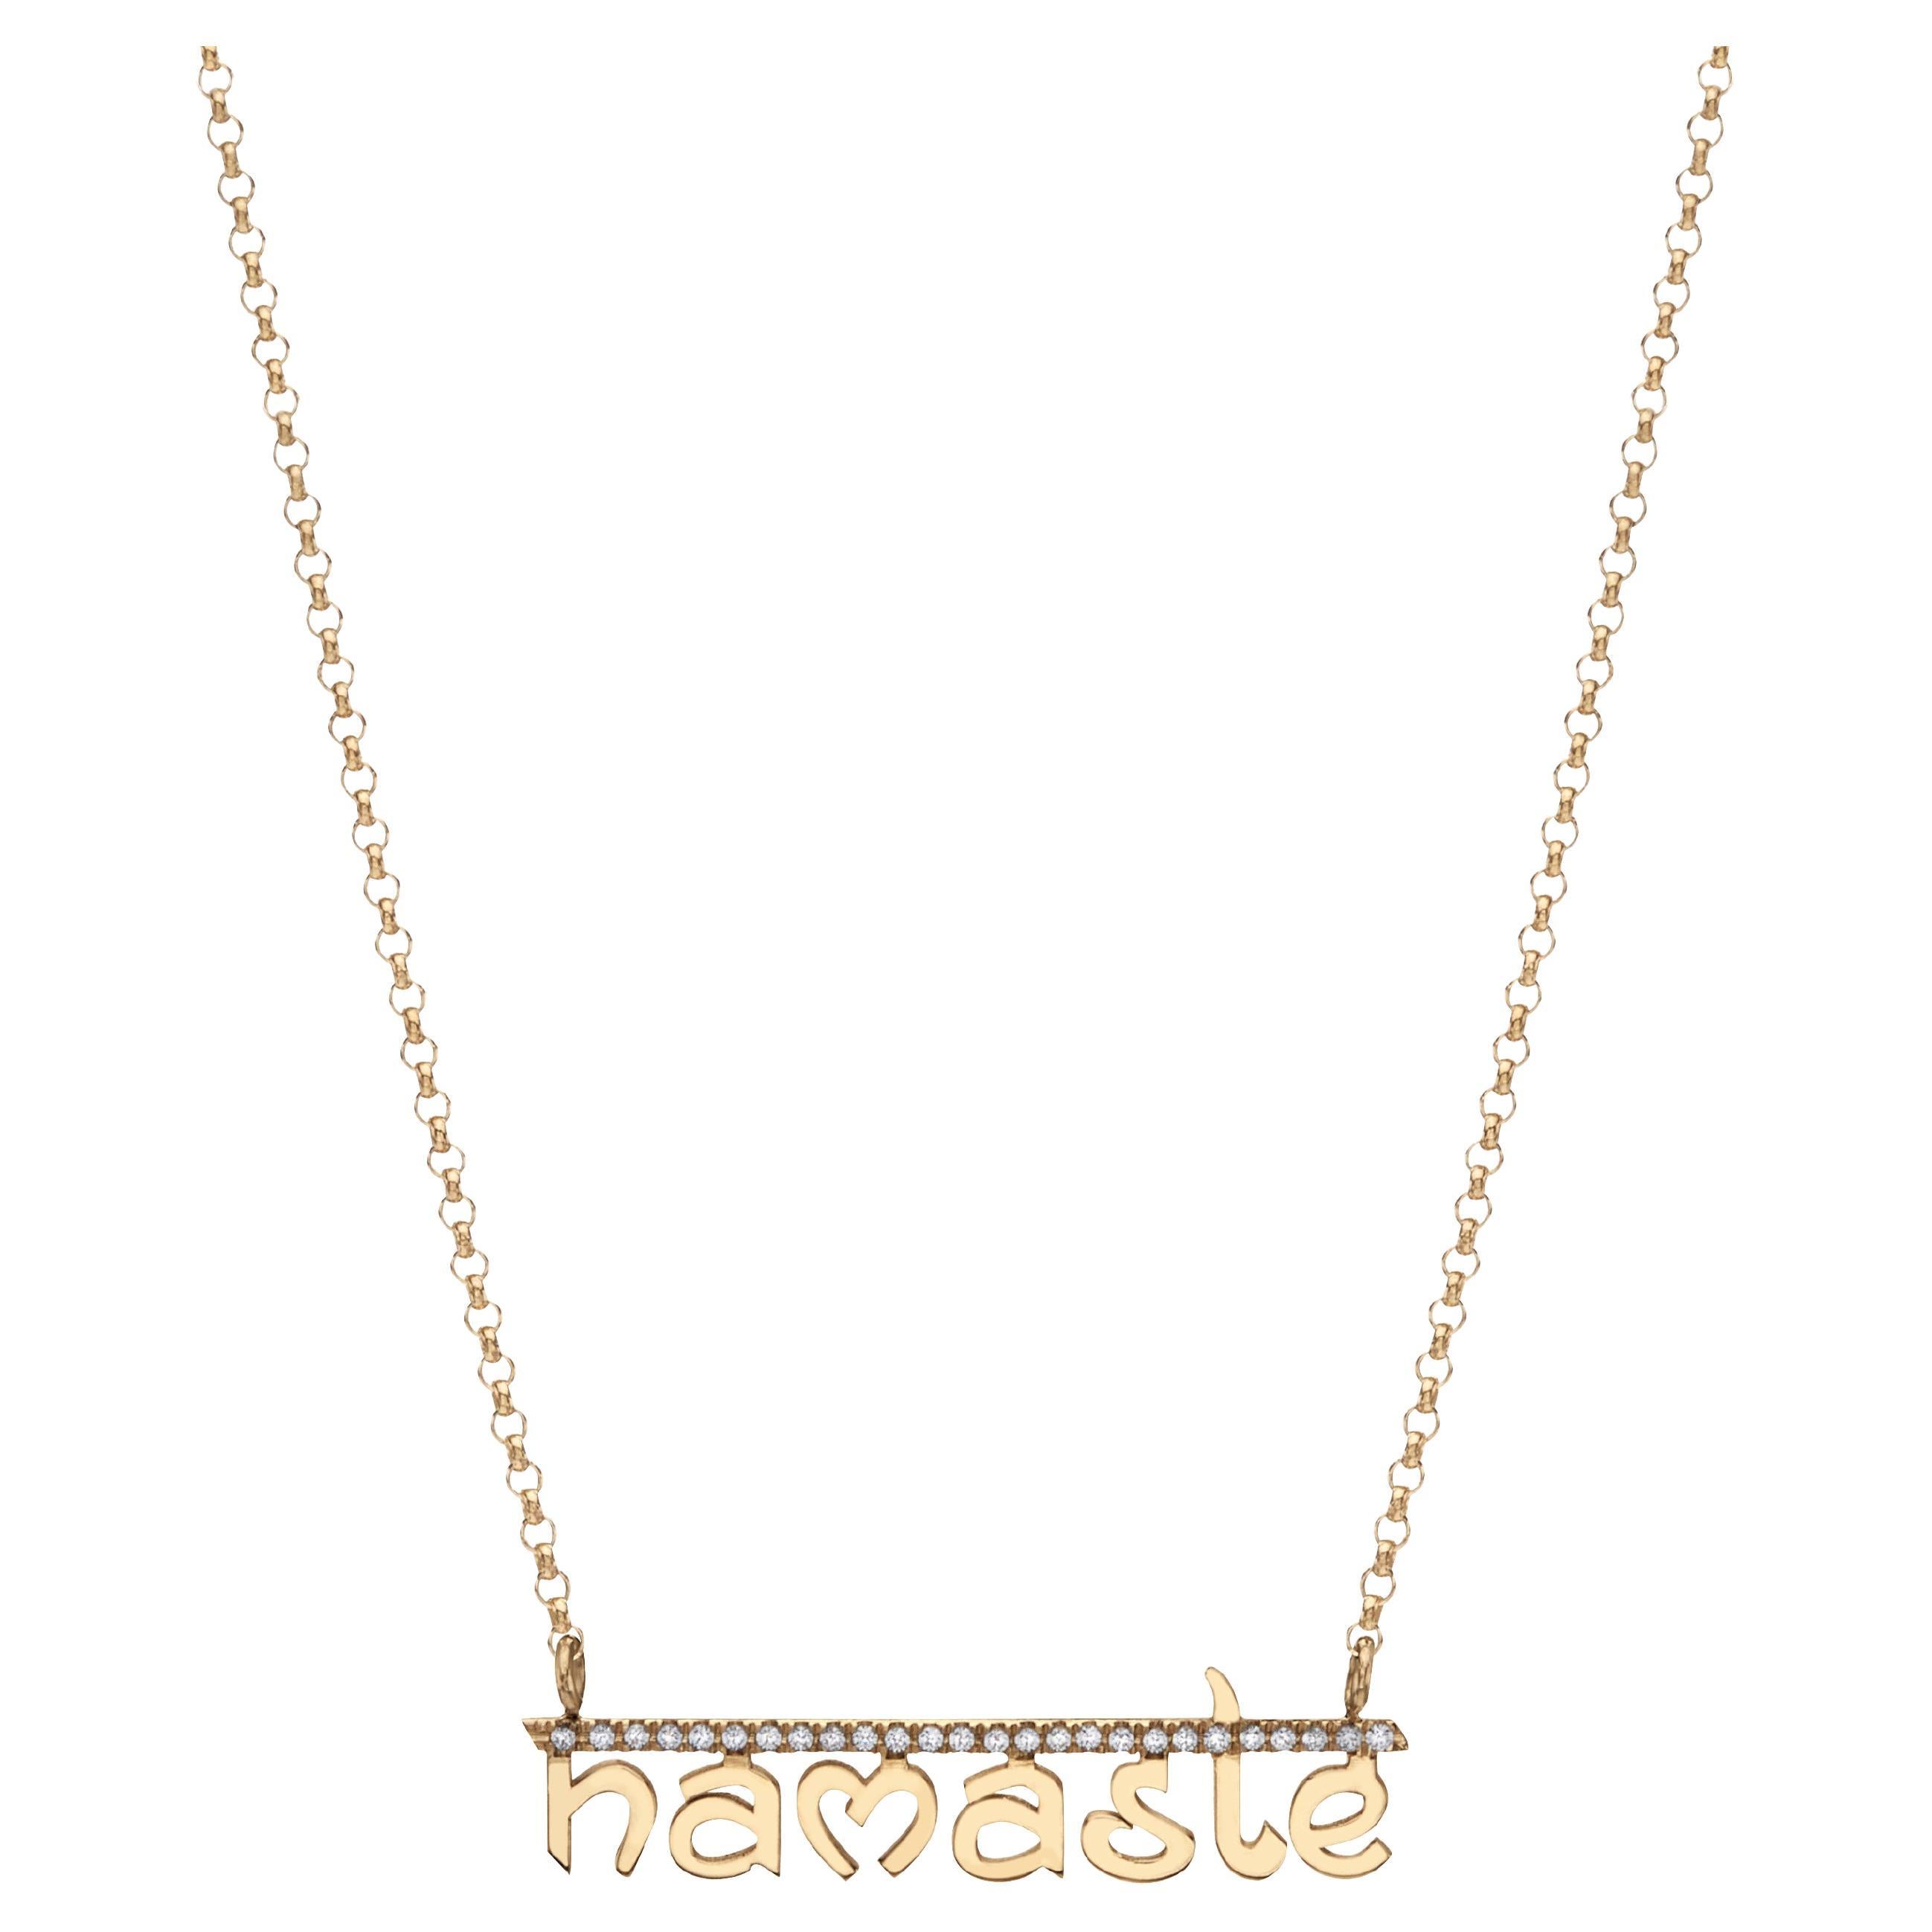 Handcrafted Pendant Necklace with Namaste 14Kt Gold with Brilliant Cut Diamonds